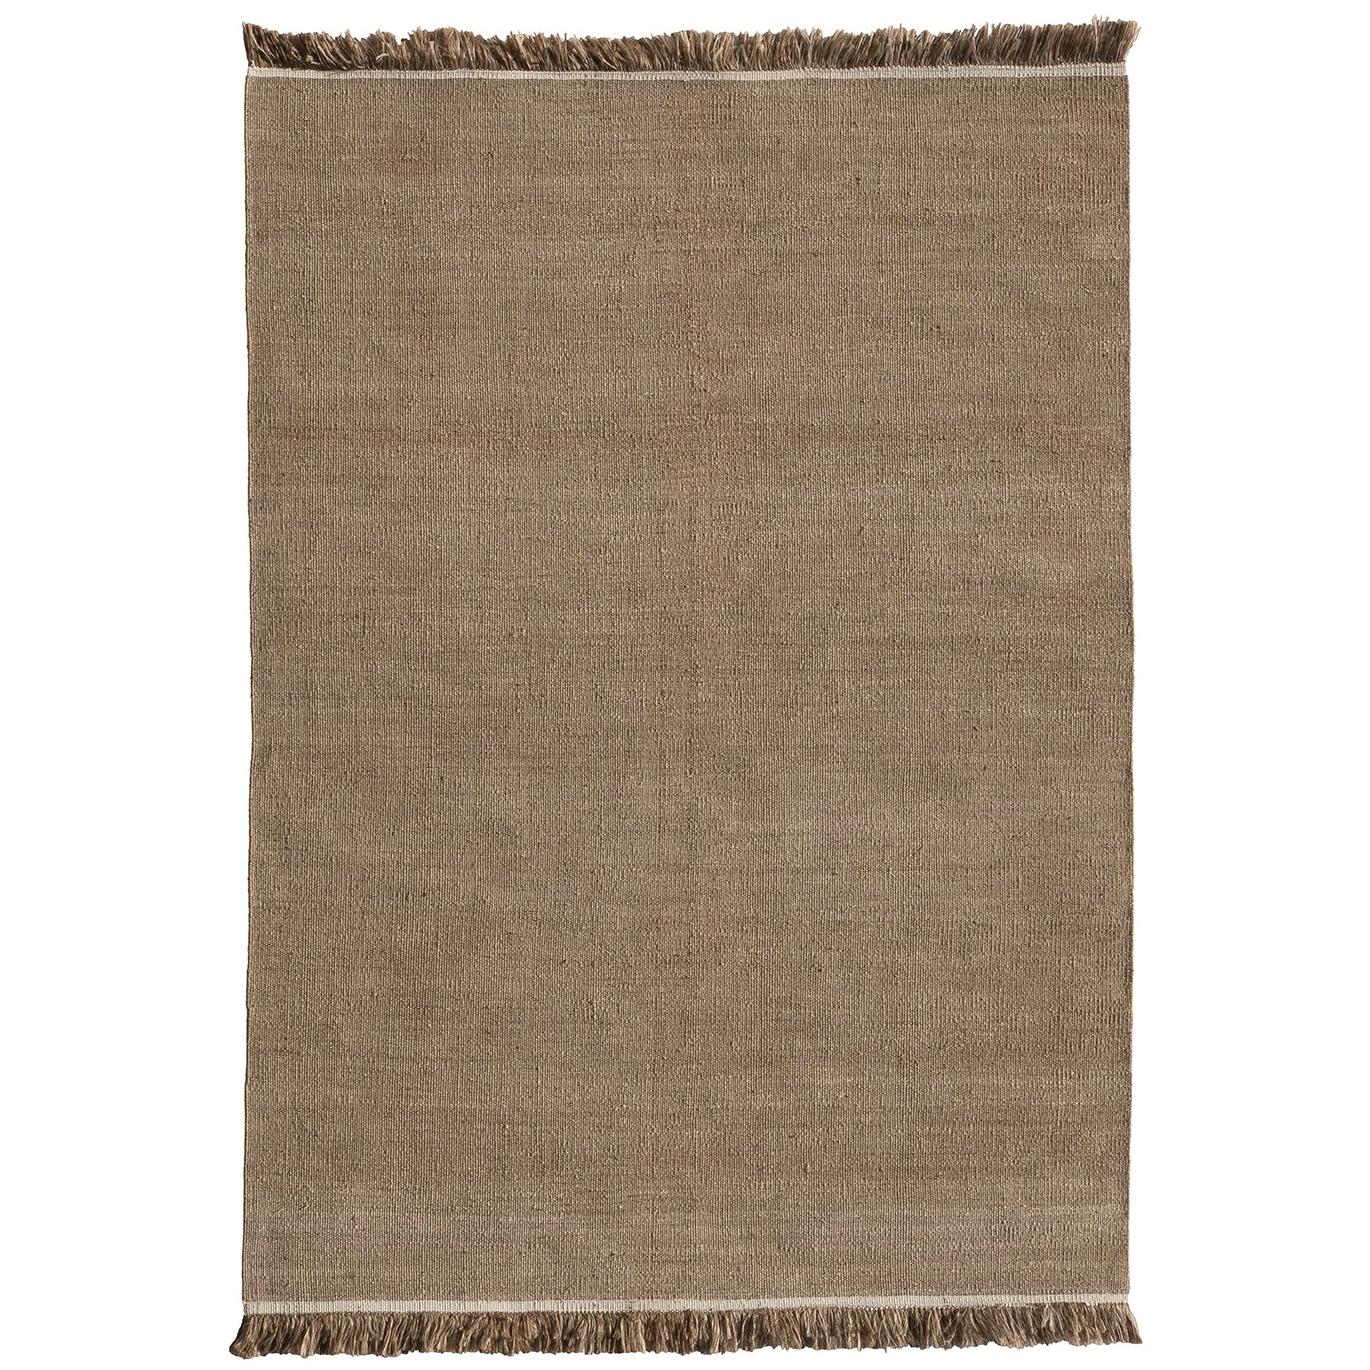 Nanimarquina Wellbeing Nettle Dhurrie Medium Rug by Ilse Crawford, Small For Sale